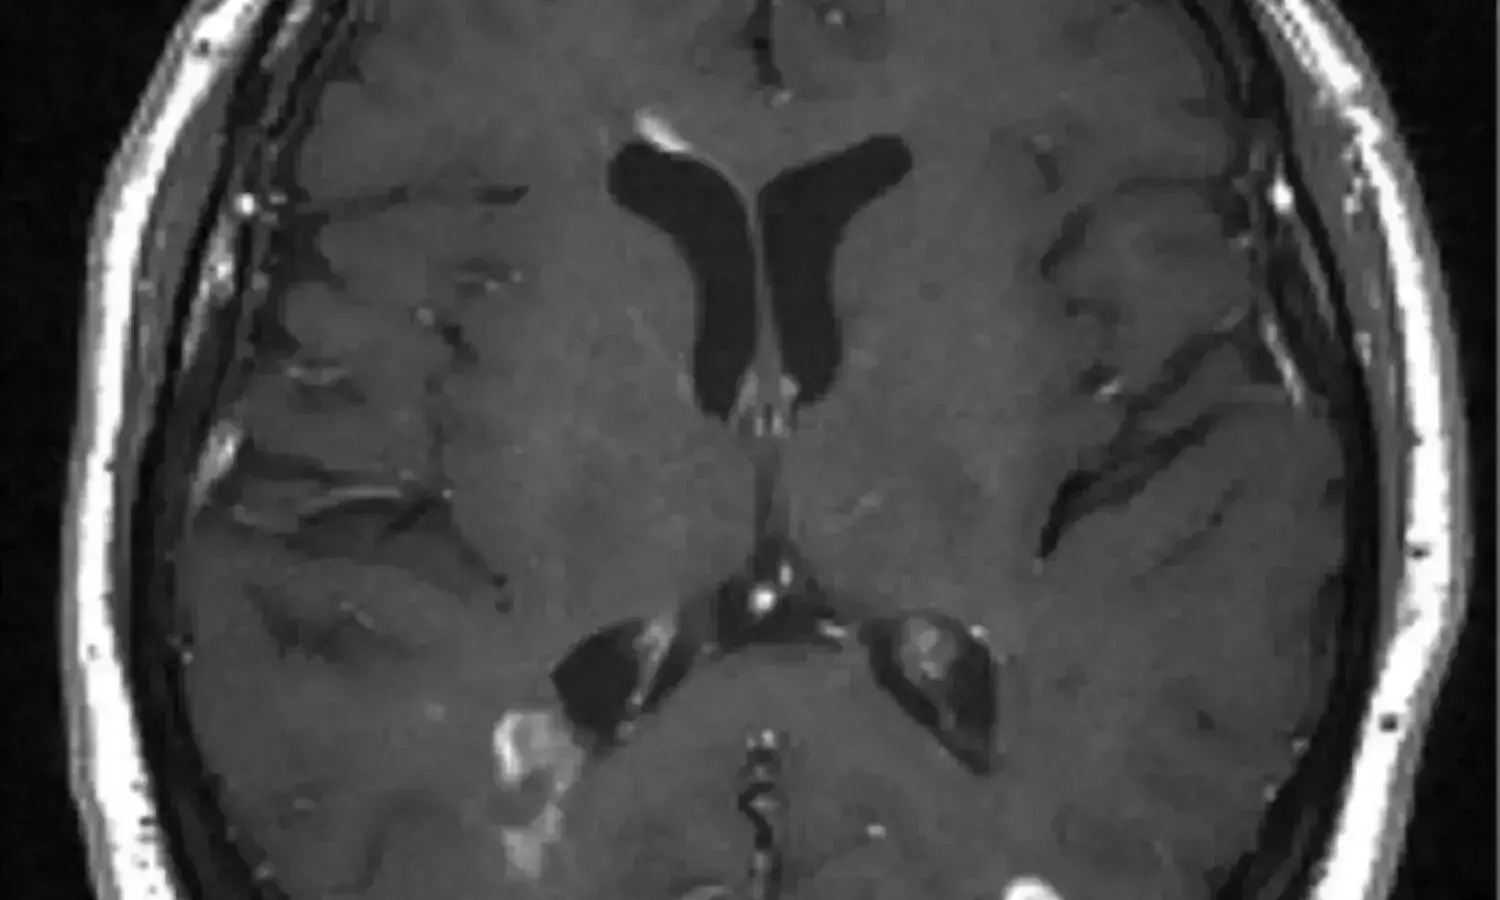 MRI use in patients with multiple sclerosis: 2021 Guideline